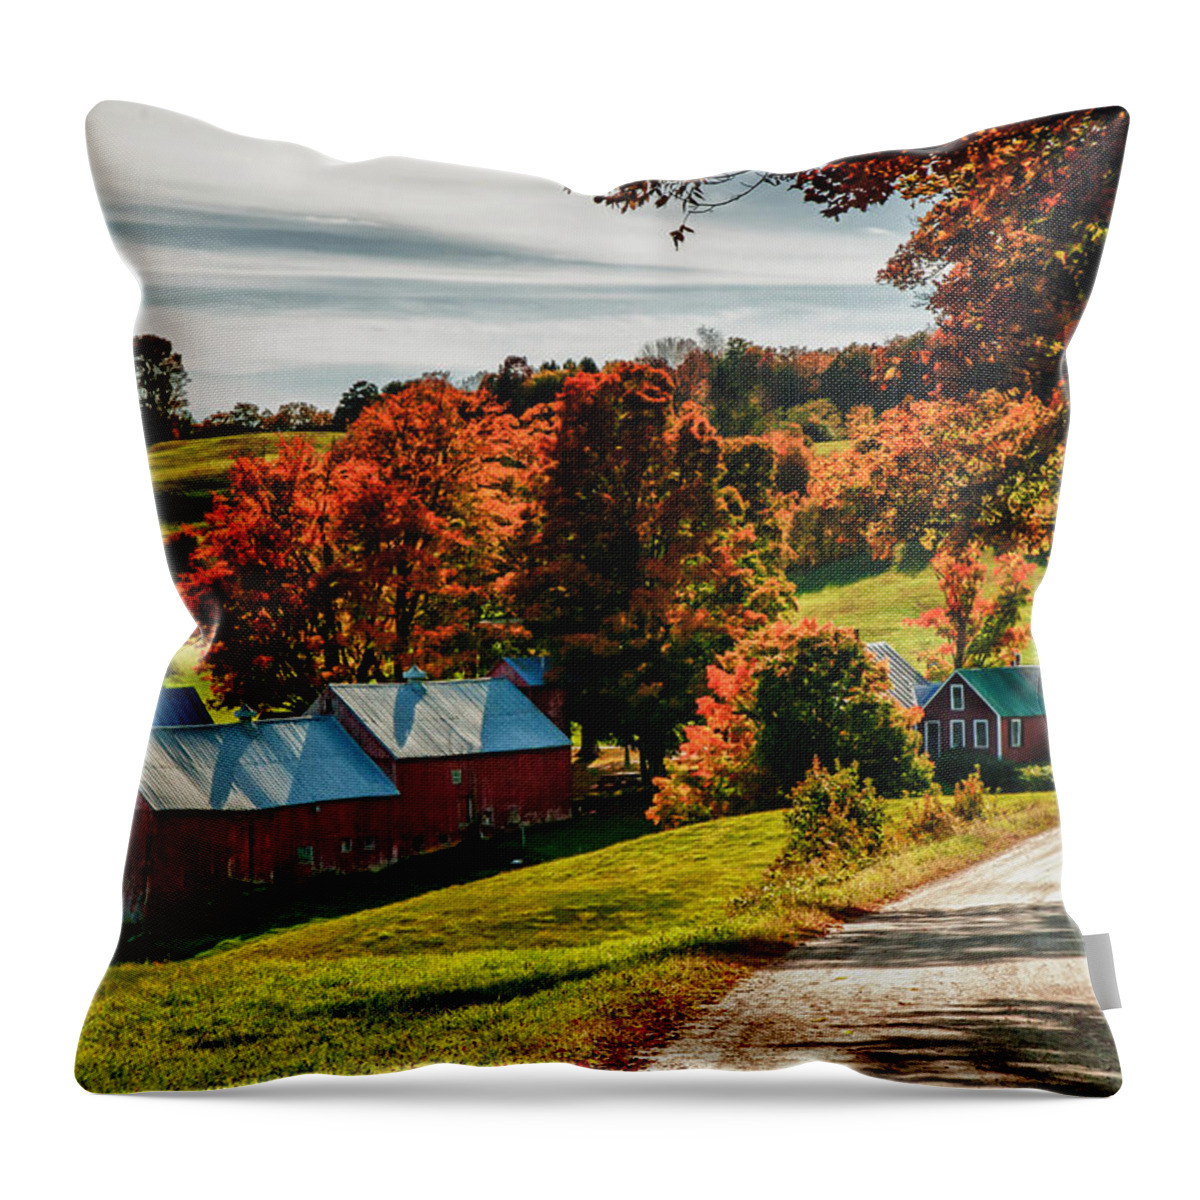  Jenne Farm Throw Pillow featuring the photograph Wandering Down The Road by Jeff Folger